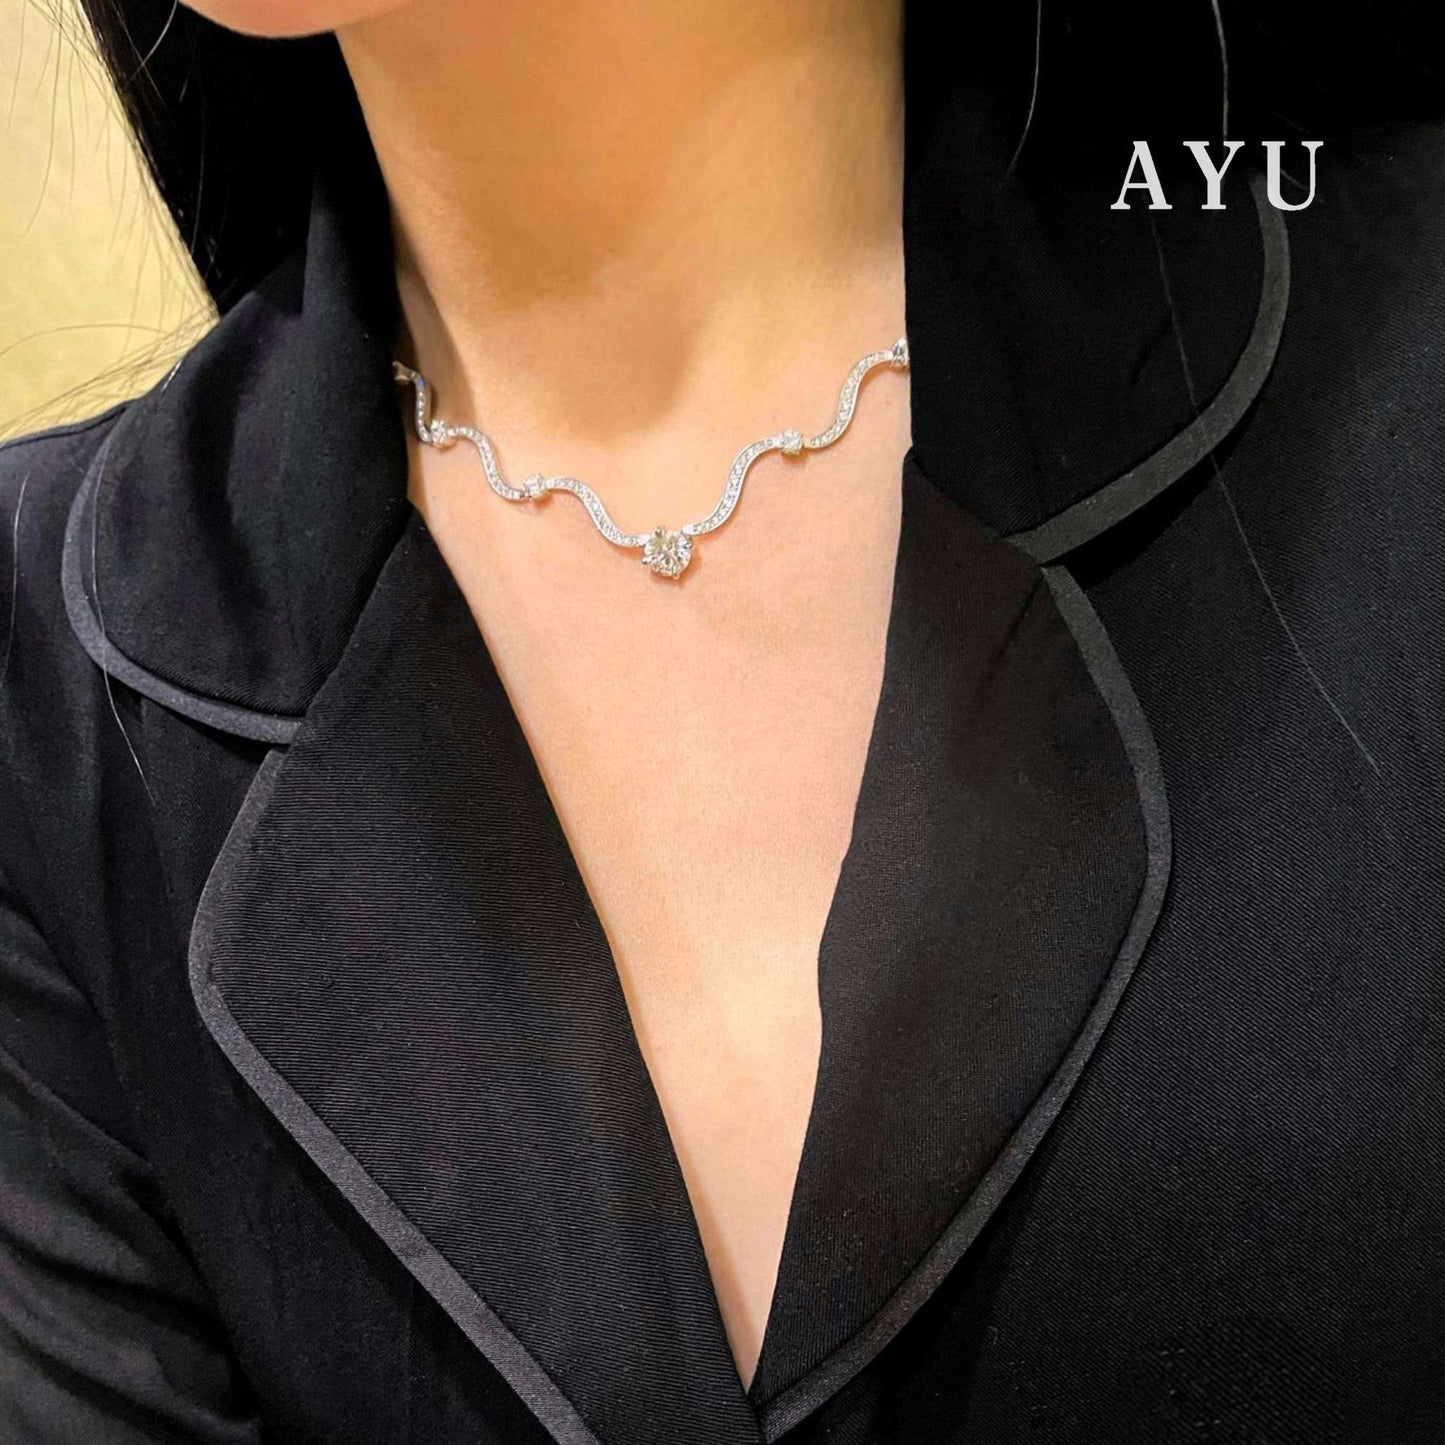 AYU Pave Wave With Round Solitaire Eternity Necklace 17k White Gold